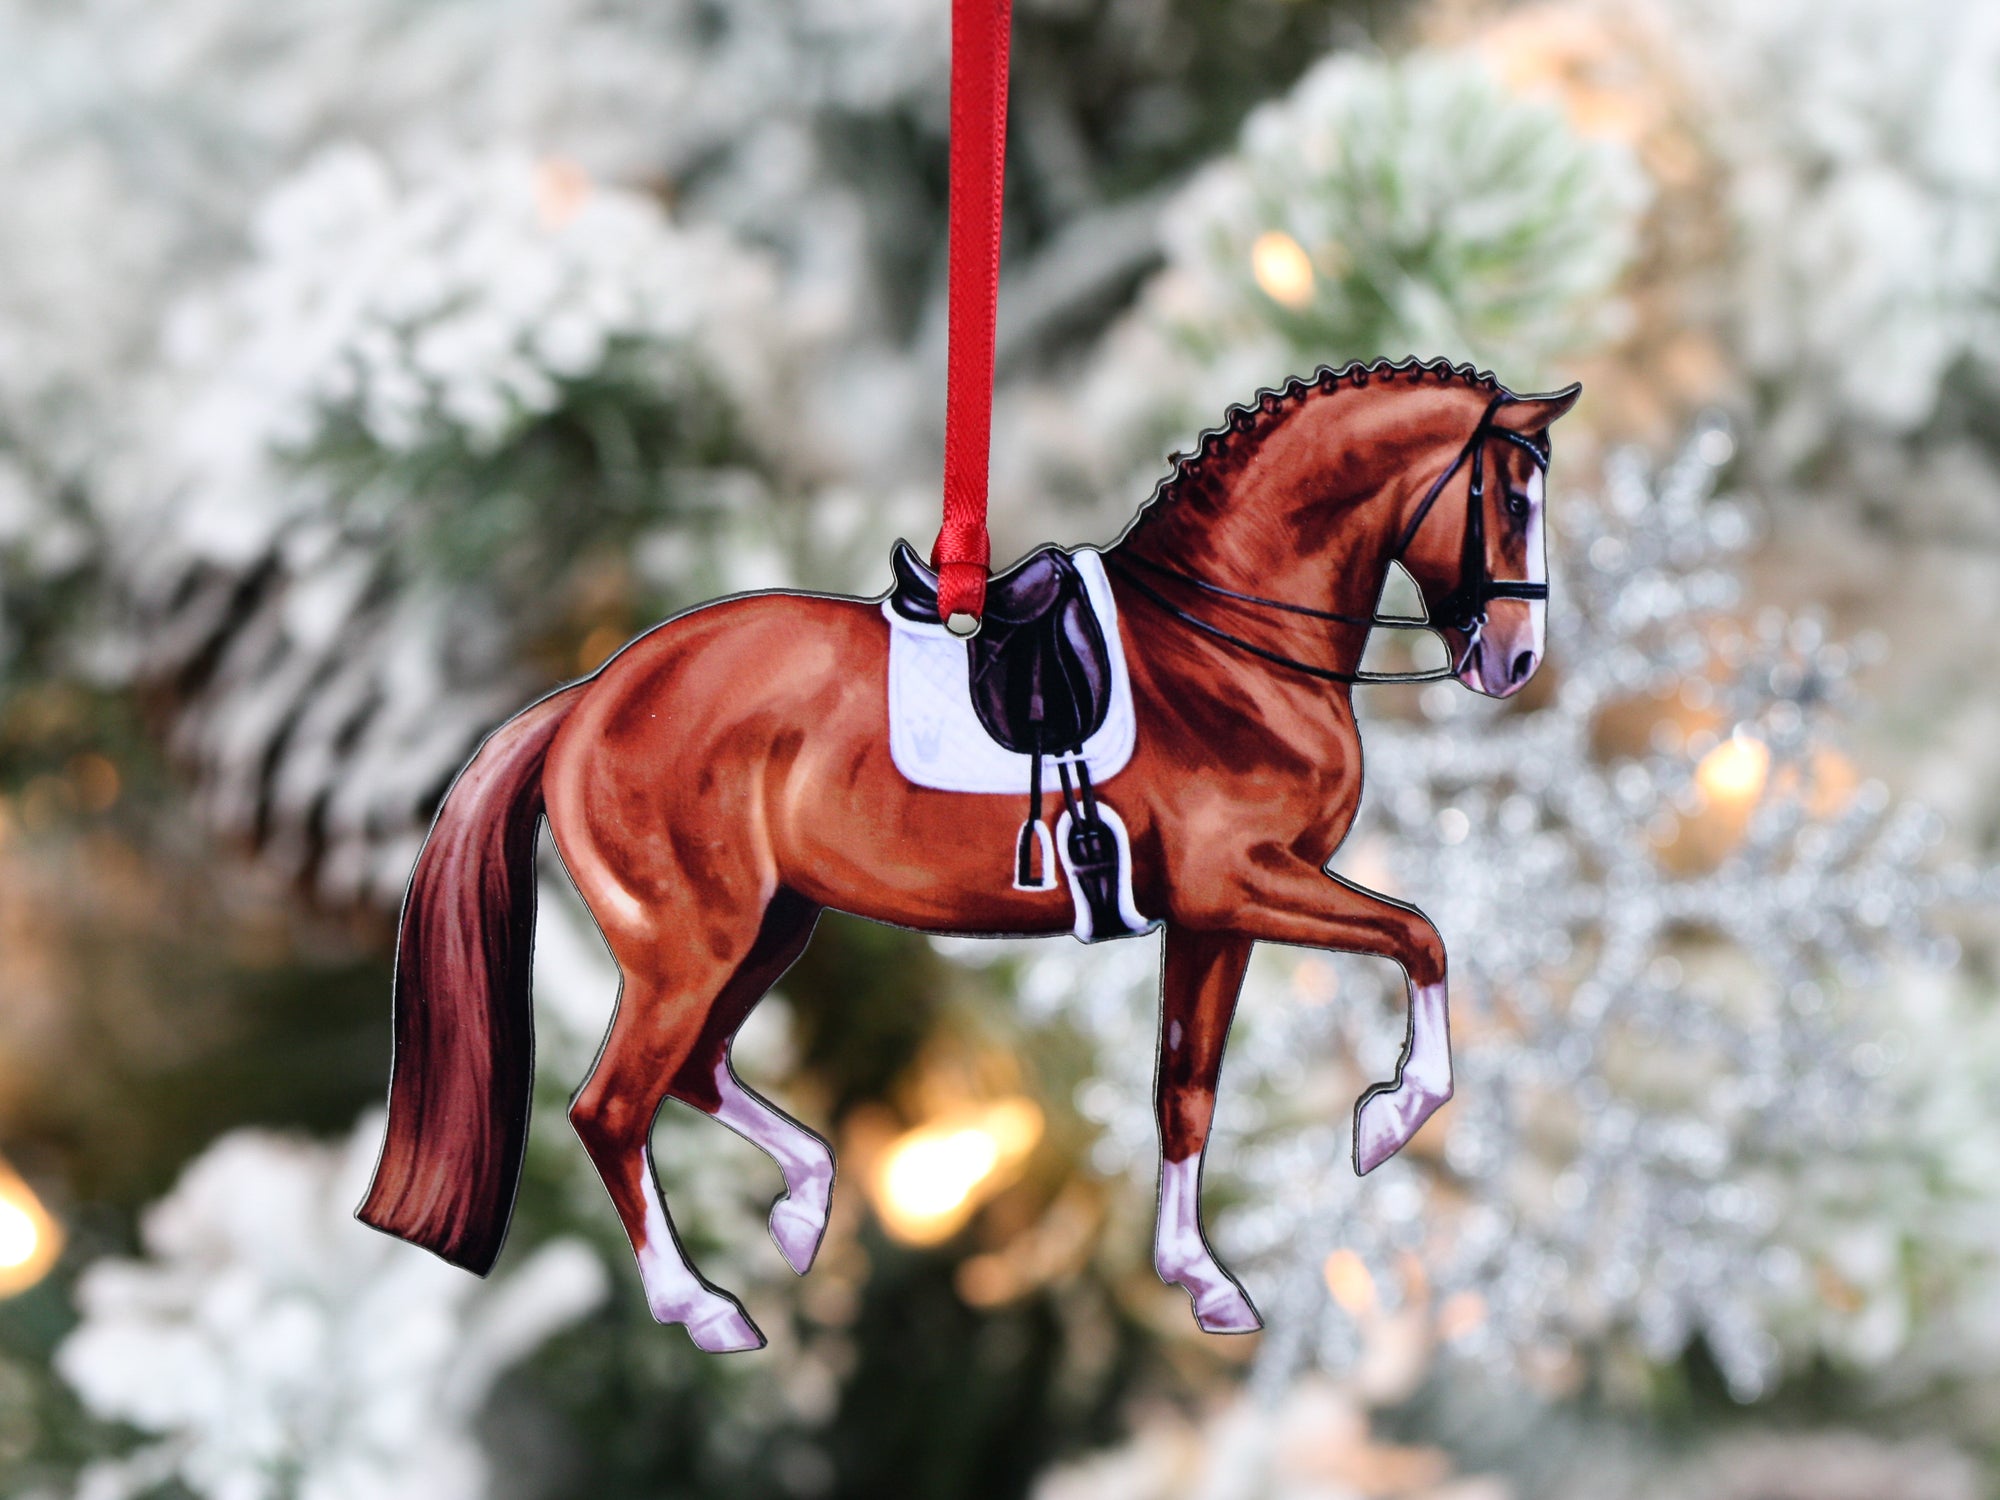 HORSE IN STALL-Personalized Ornament My Personalized Ornaments